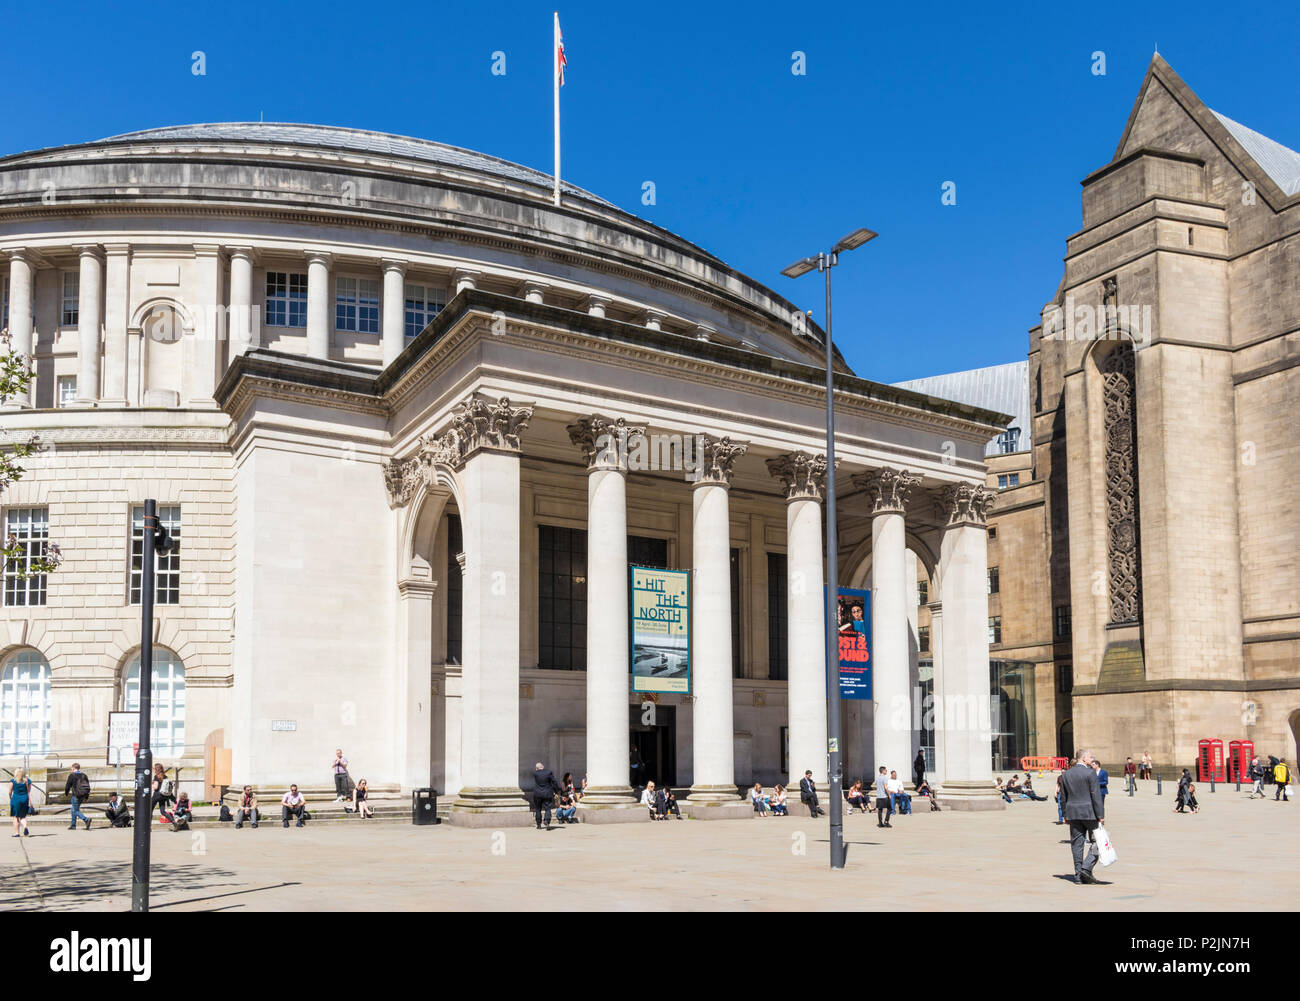 Inghilterra Manchester Inghilterra Greater Manchester City Centre city centre Manchester Central Library St Peters Square Manchester City Centre Manchester Regno Unito Foto Stock